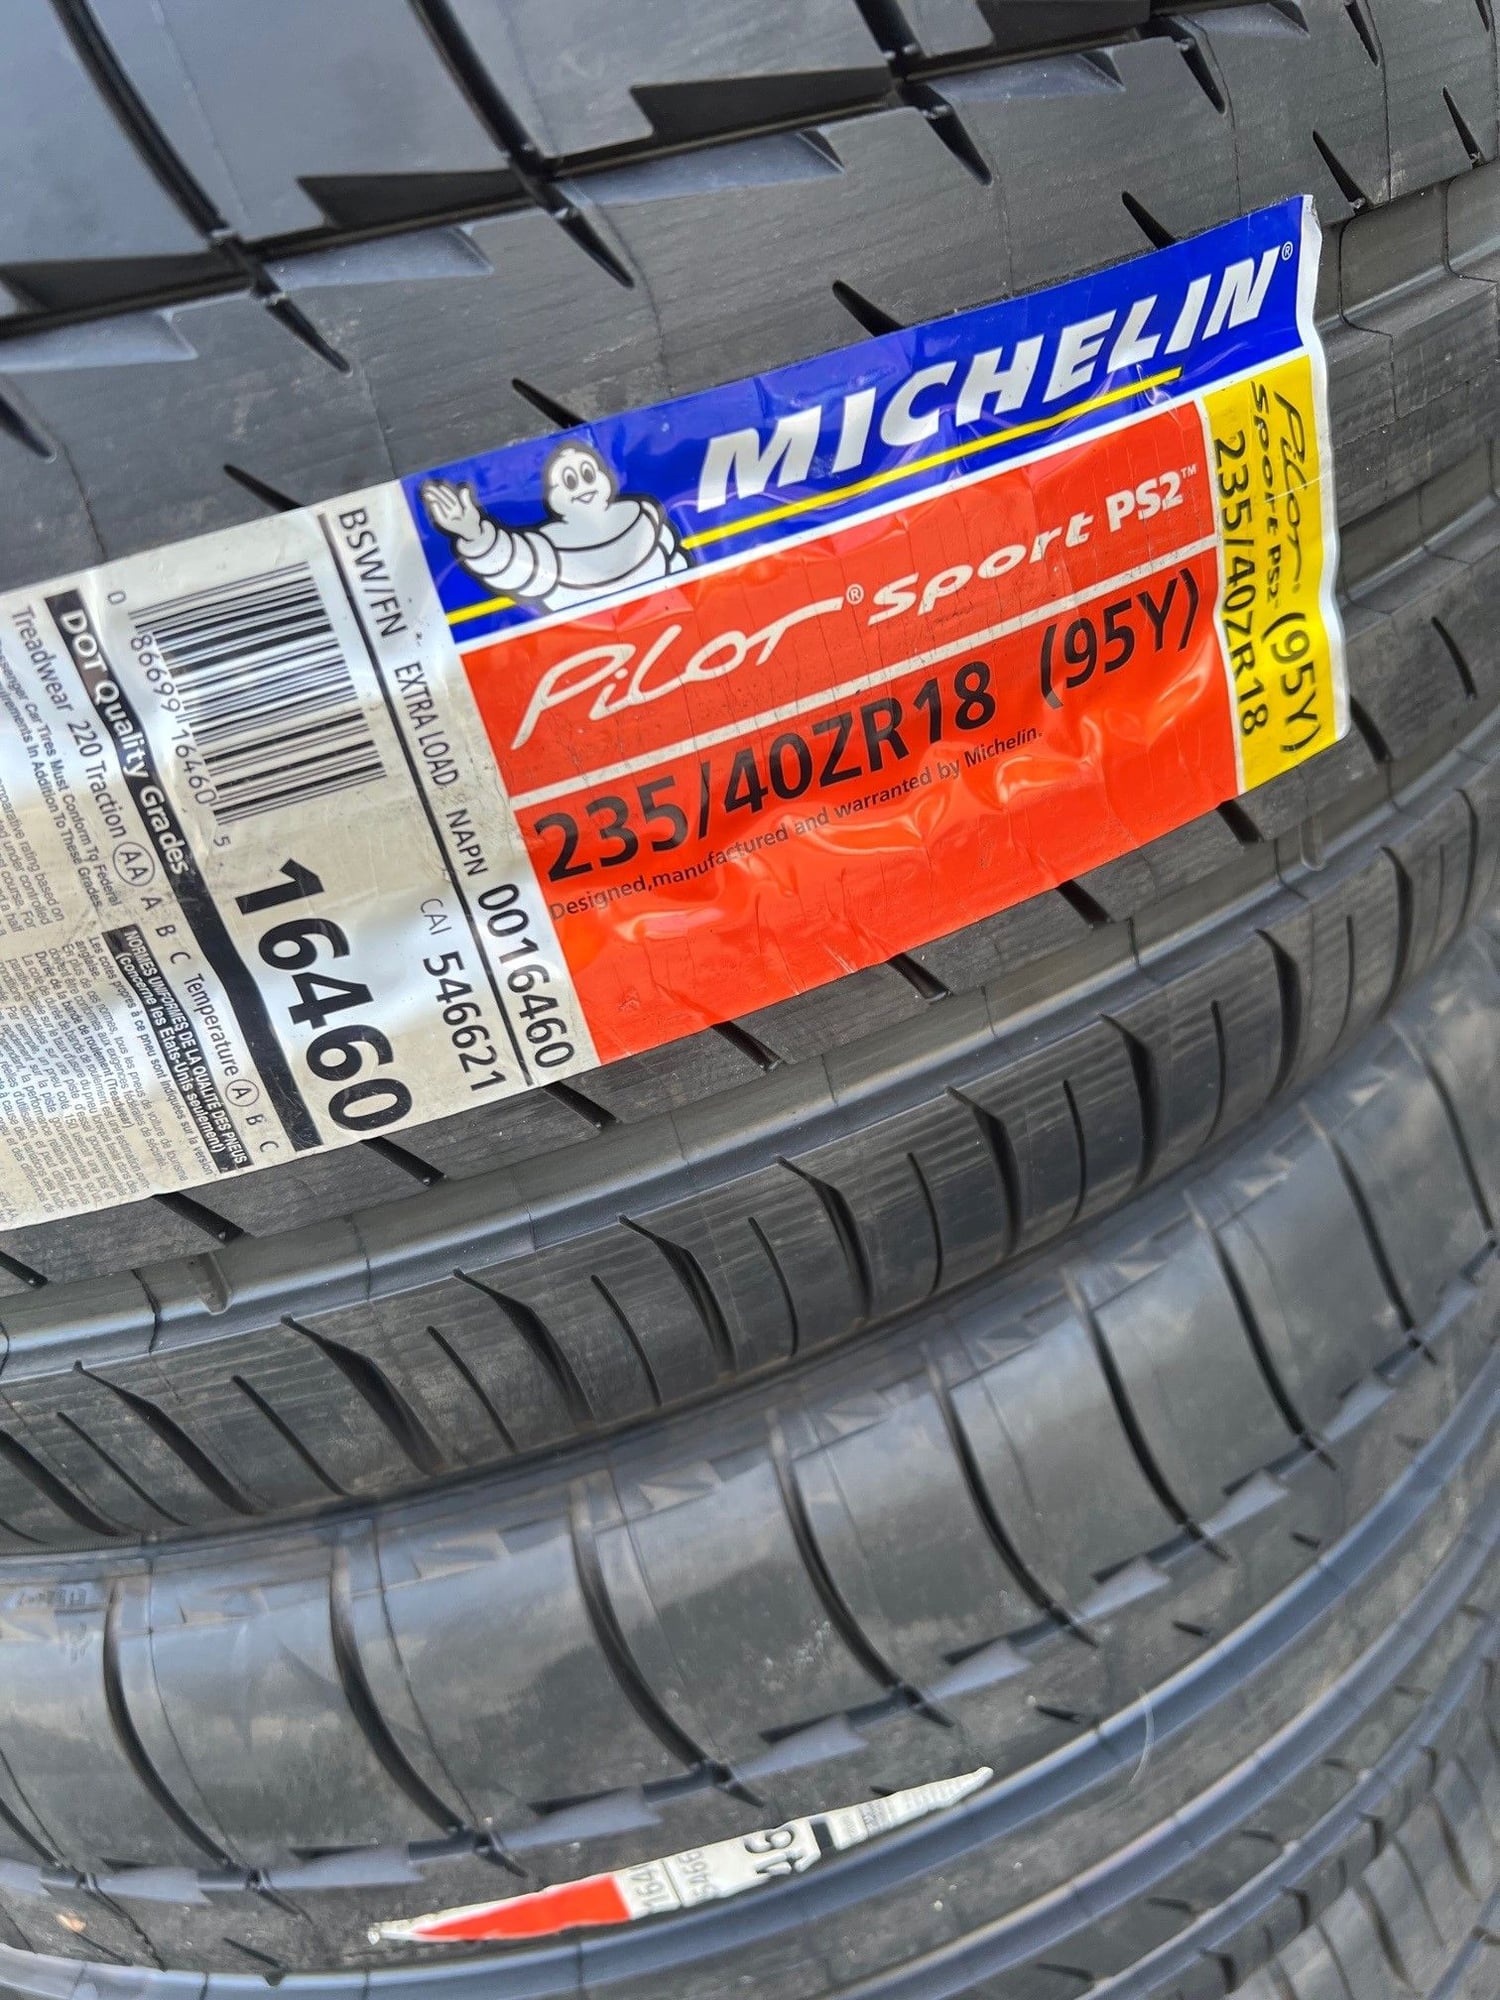 Wheels and Tires/Axles - FS: NEW Michelin Pilot Sport PS2's - New - All Years Any Make All Models - Brea, CA 92821, United States